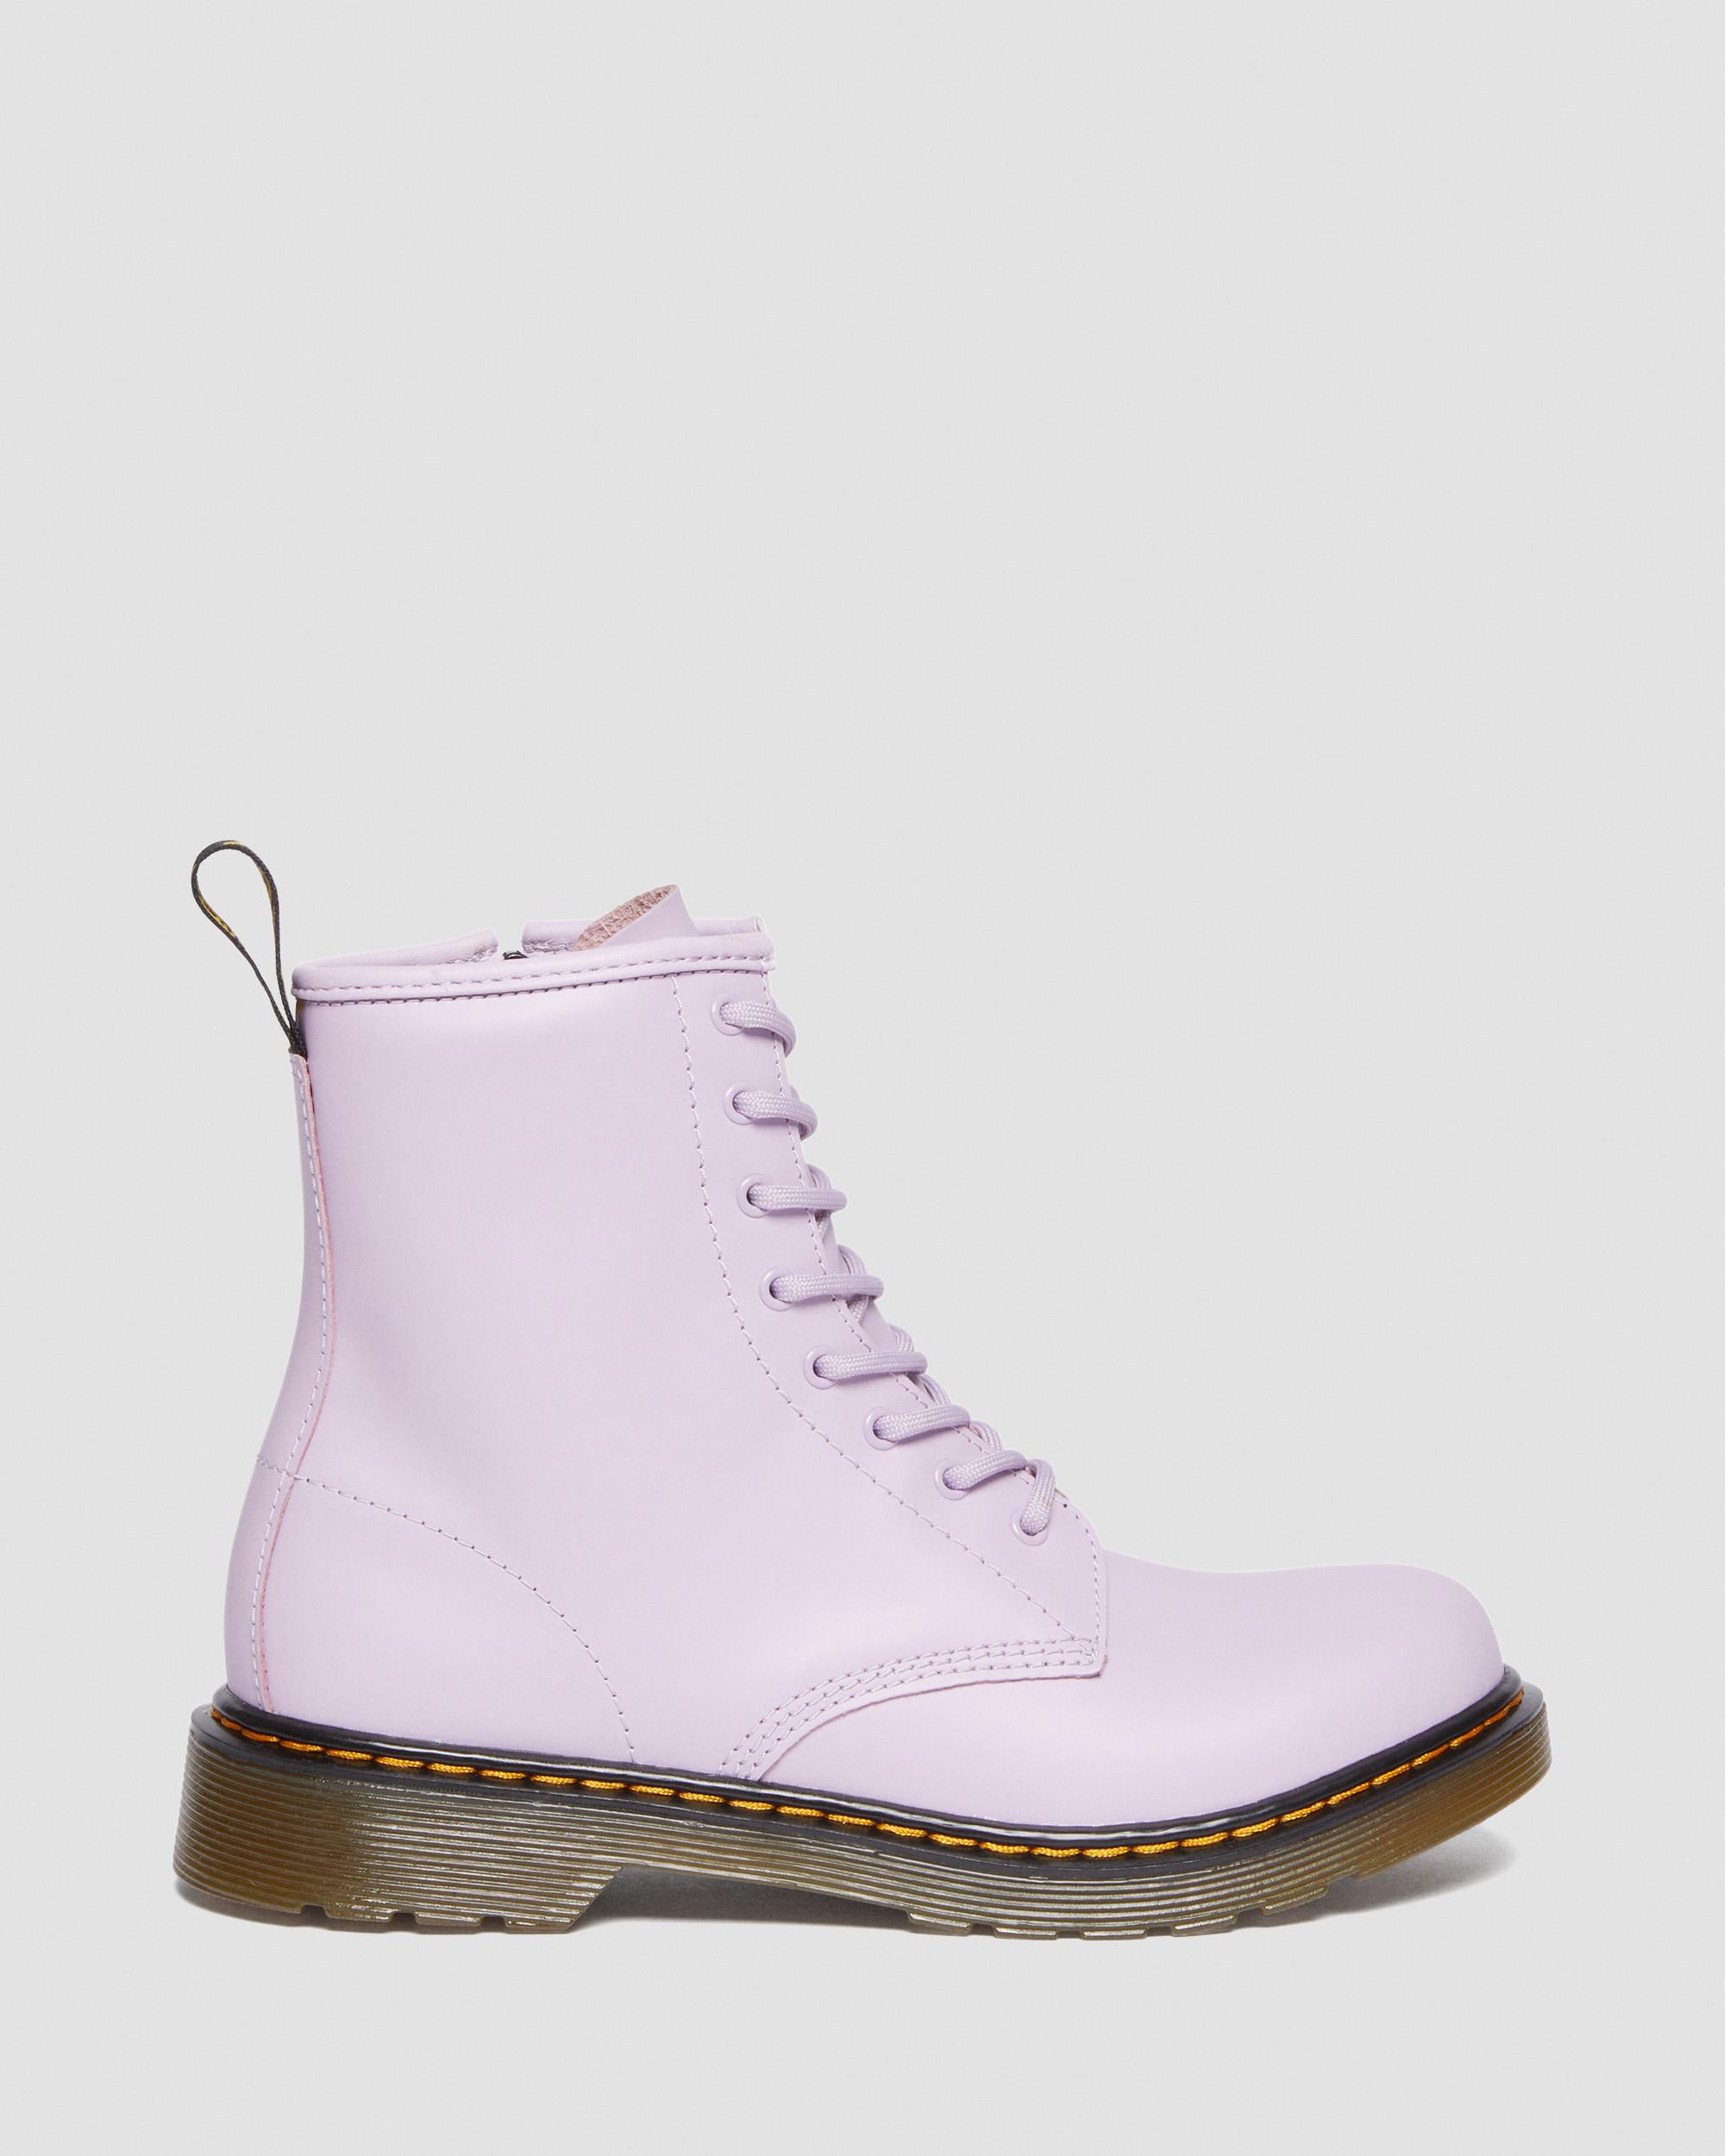 Youth 1460 Romario Leather Martens Lace Up Boots in Dr. | Lilac